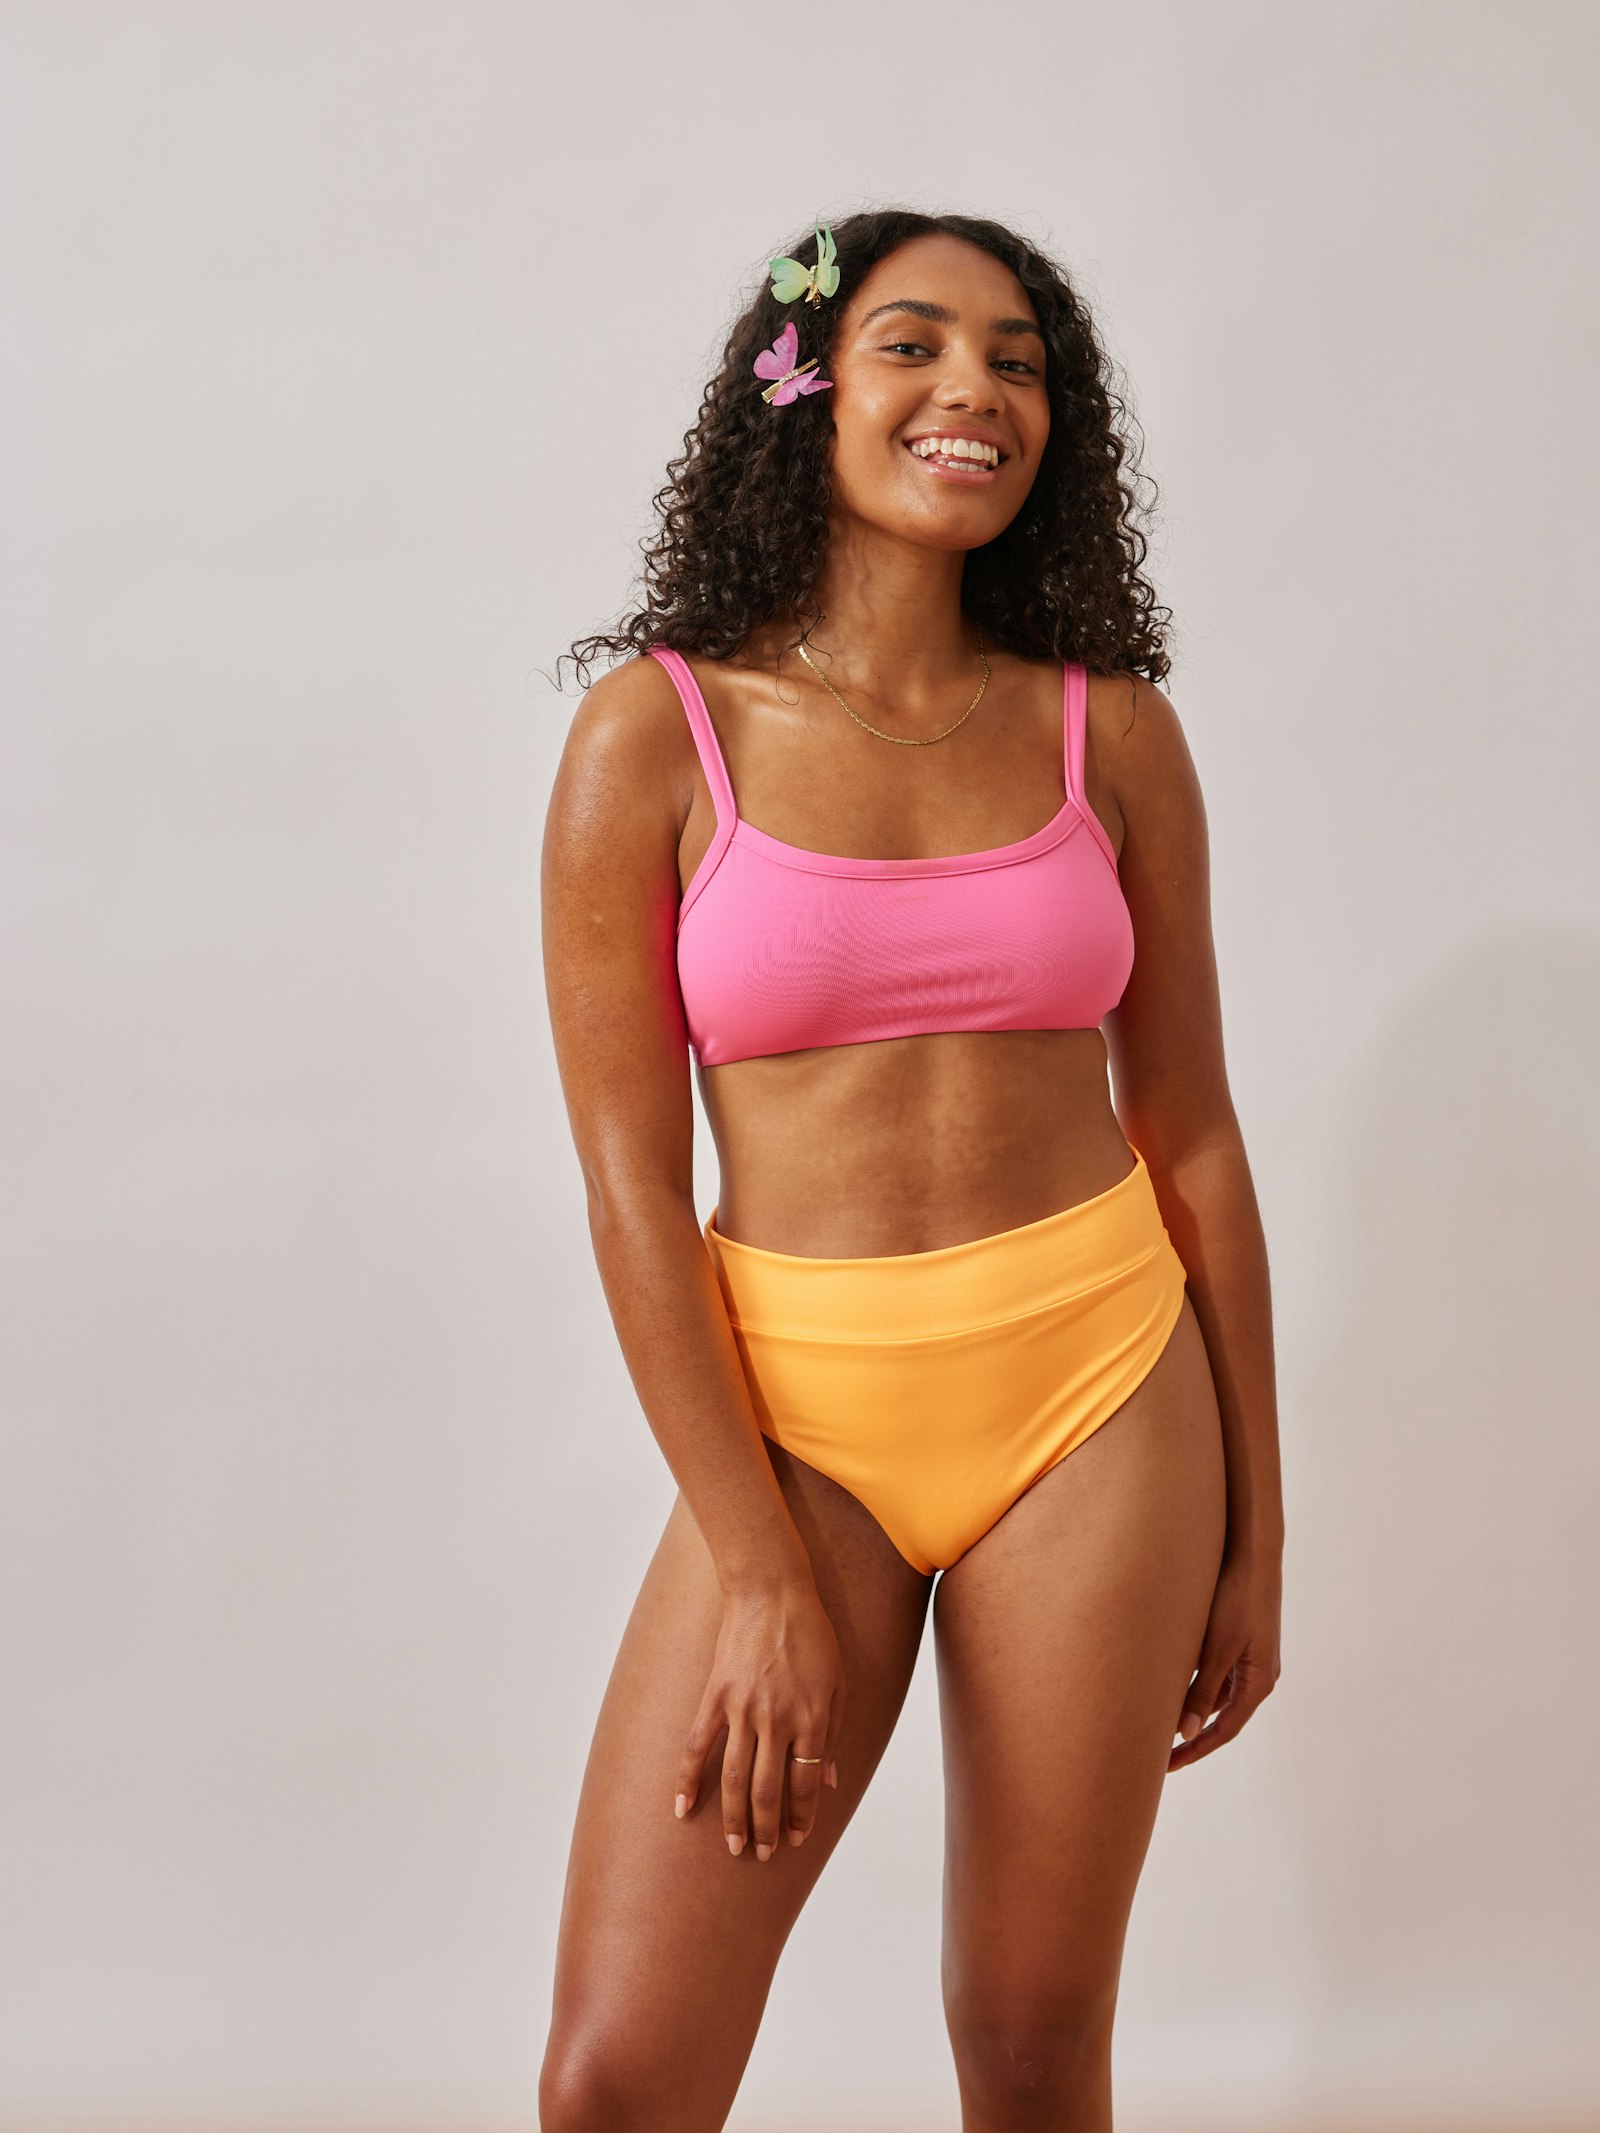 Tangerine Activewear for Women for sale